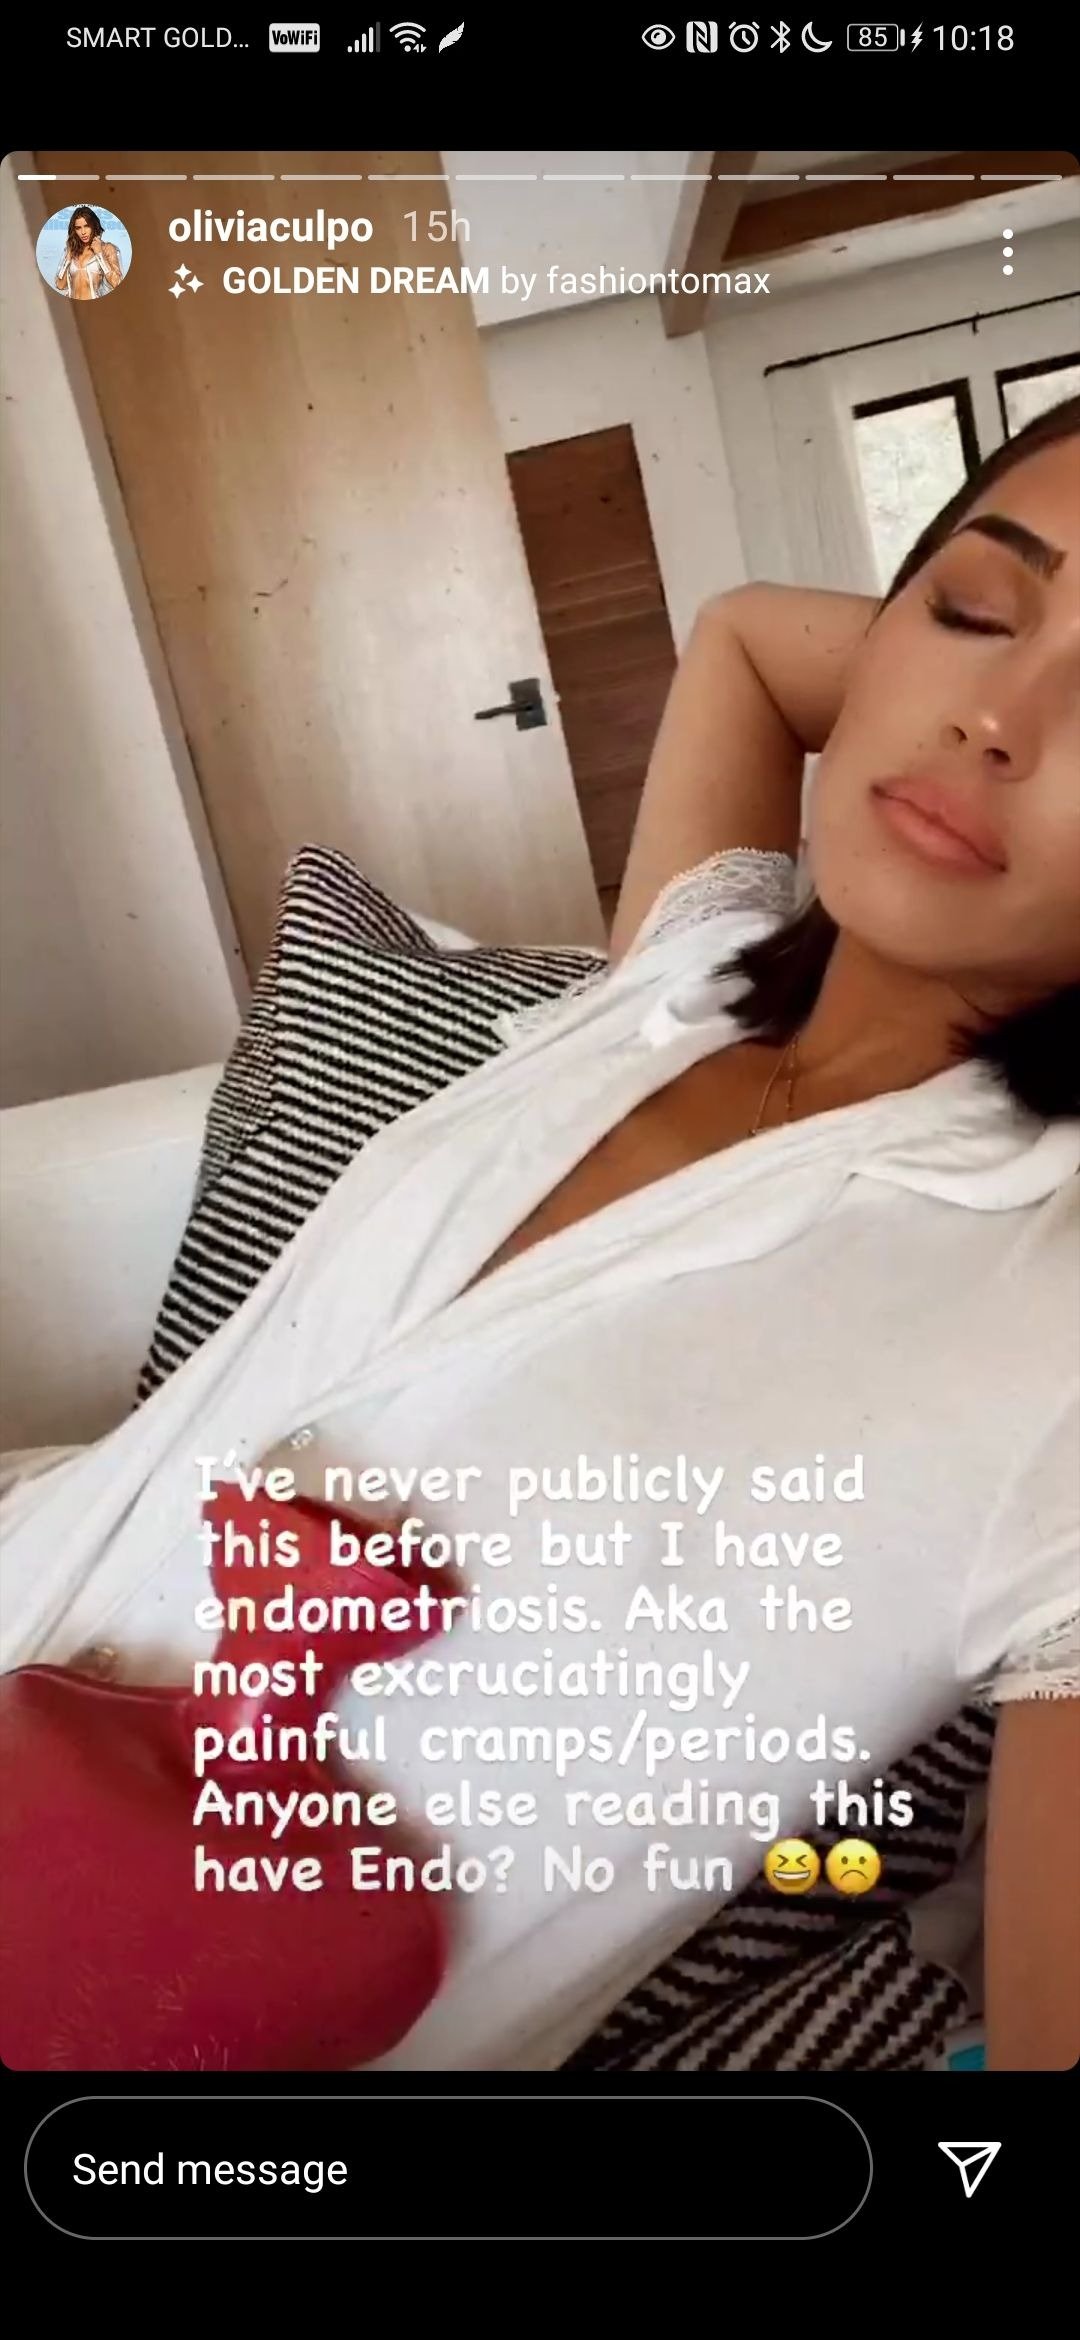 Olivia Culpo shares information about endometriosis on her Instagram stories | Photo: Instagram/ Olivia Culpo